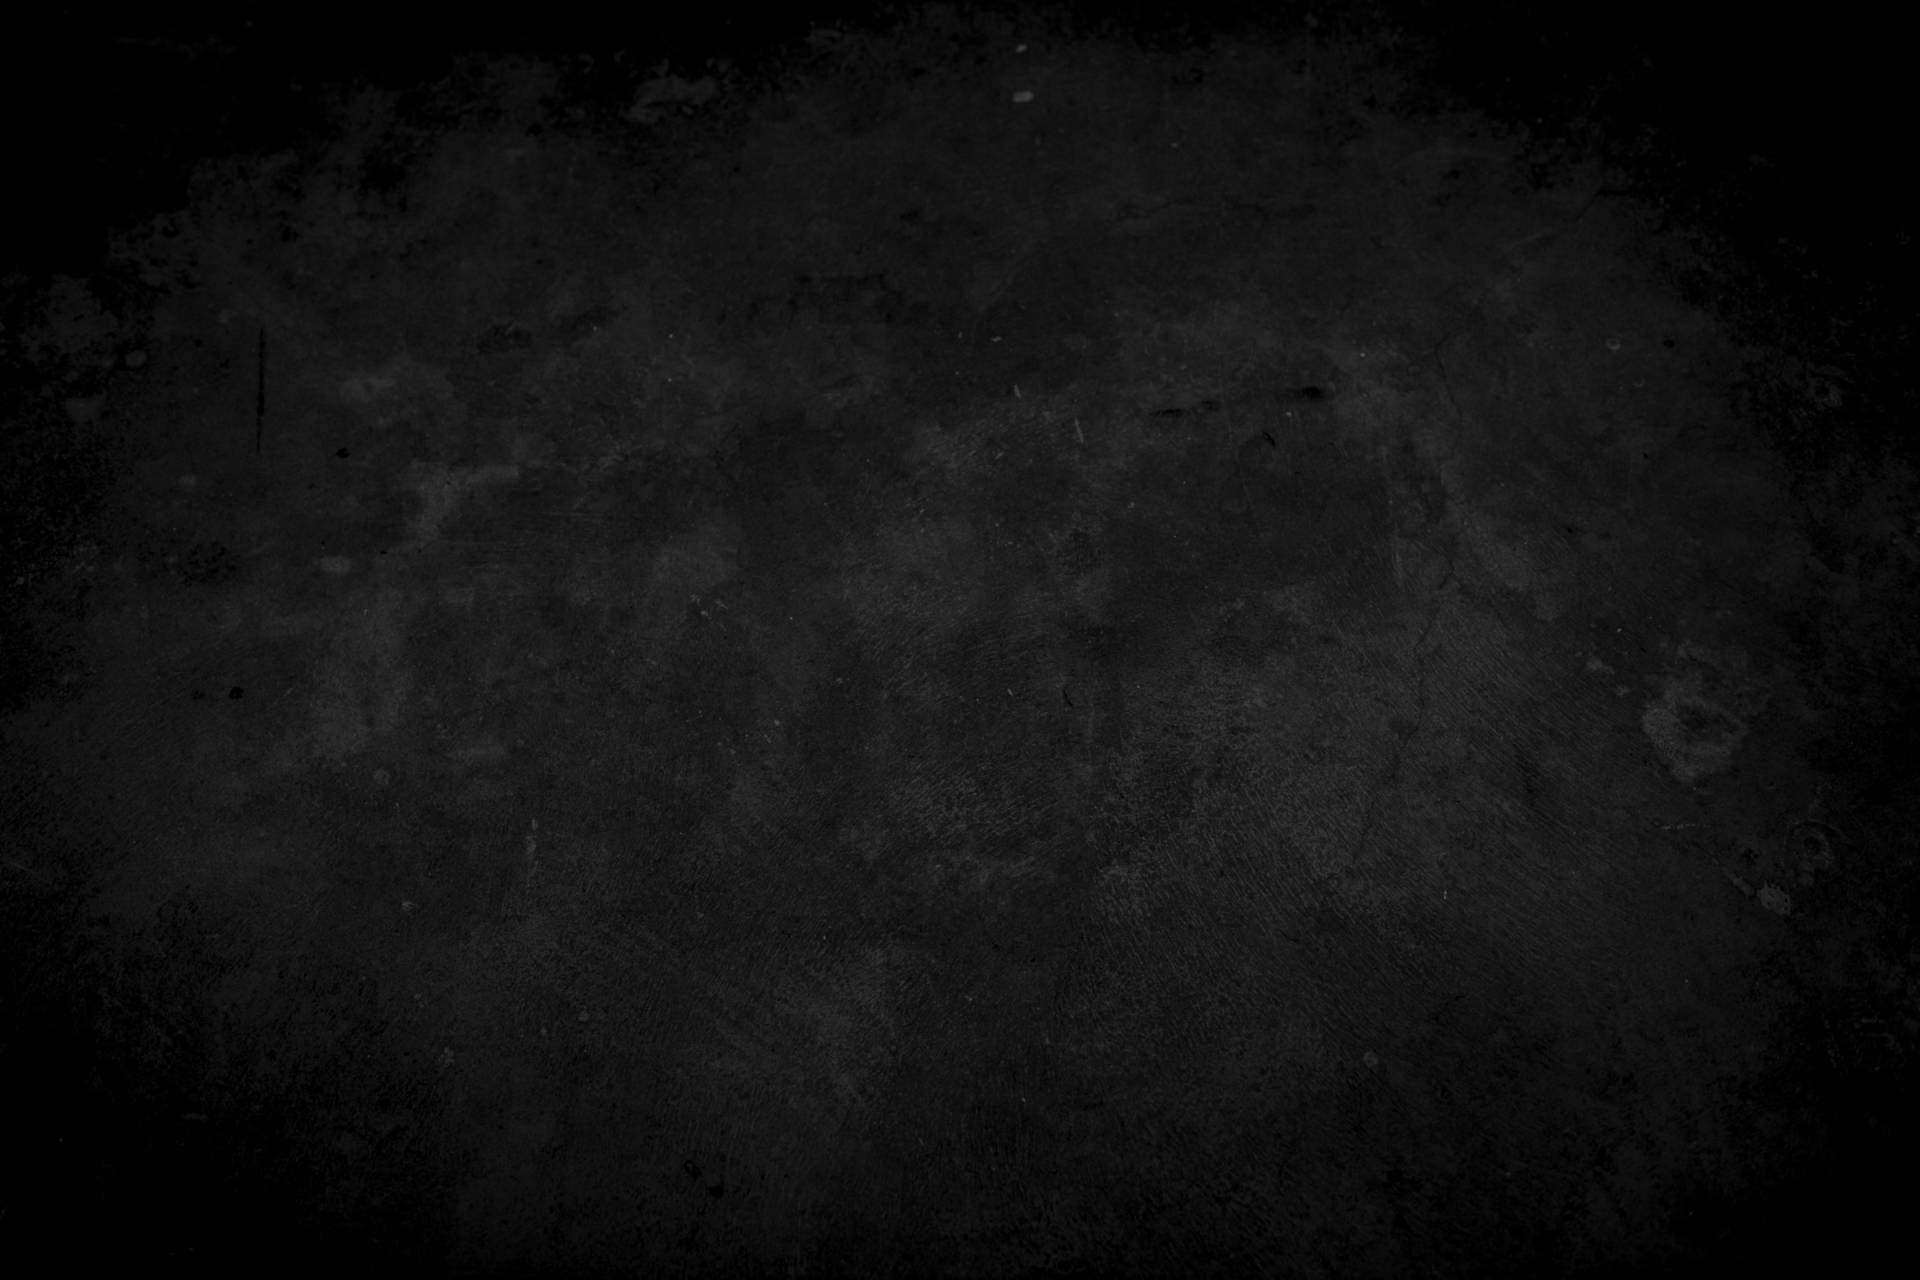 8256X5504 Black Wallpaper and Background